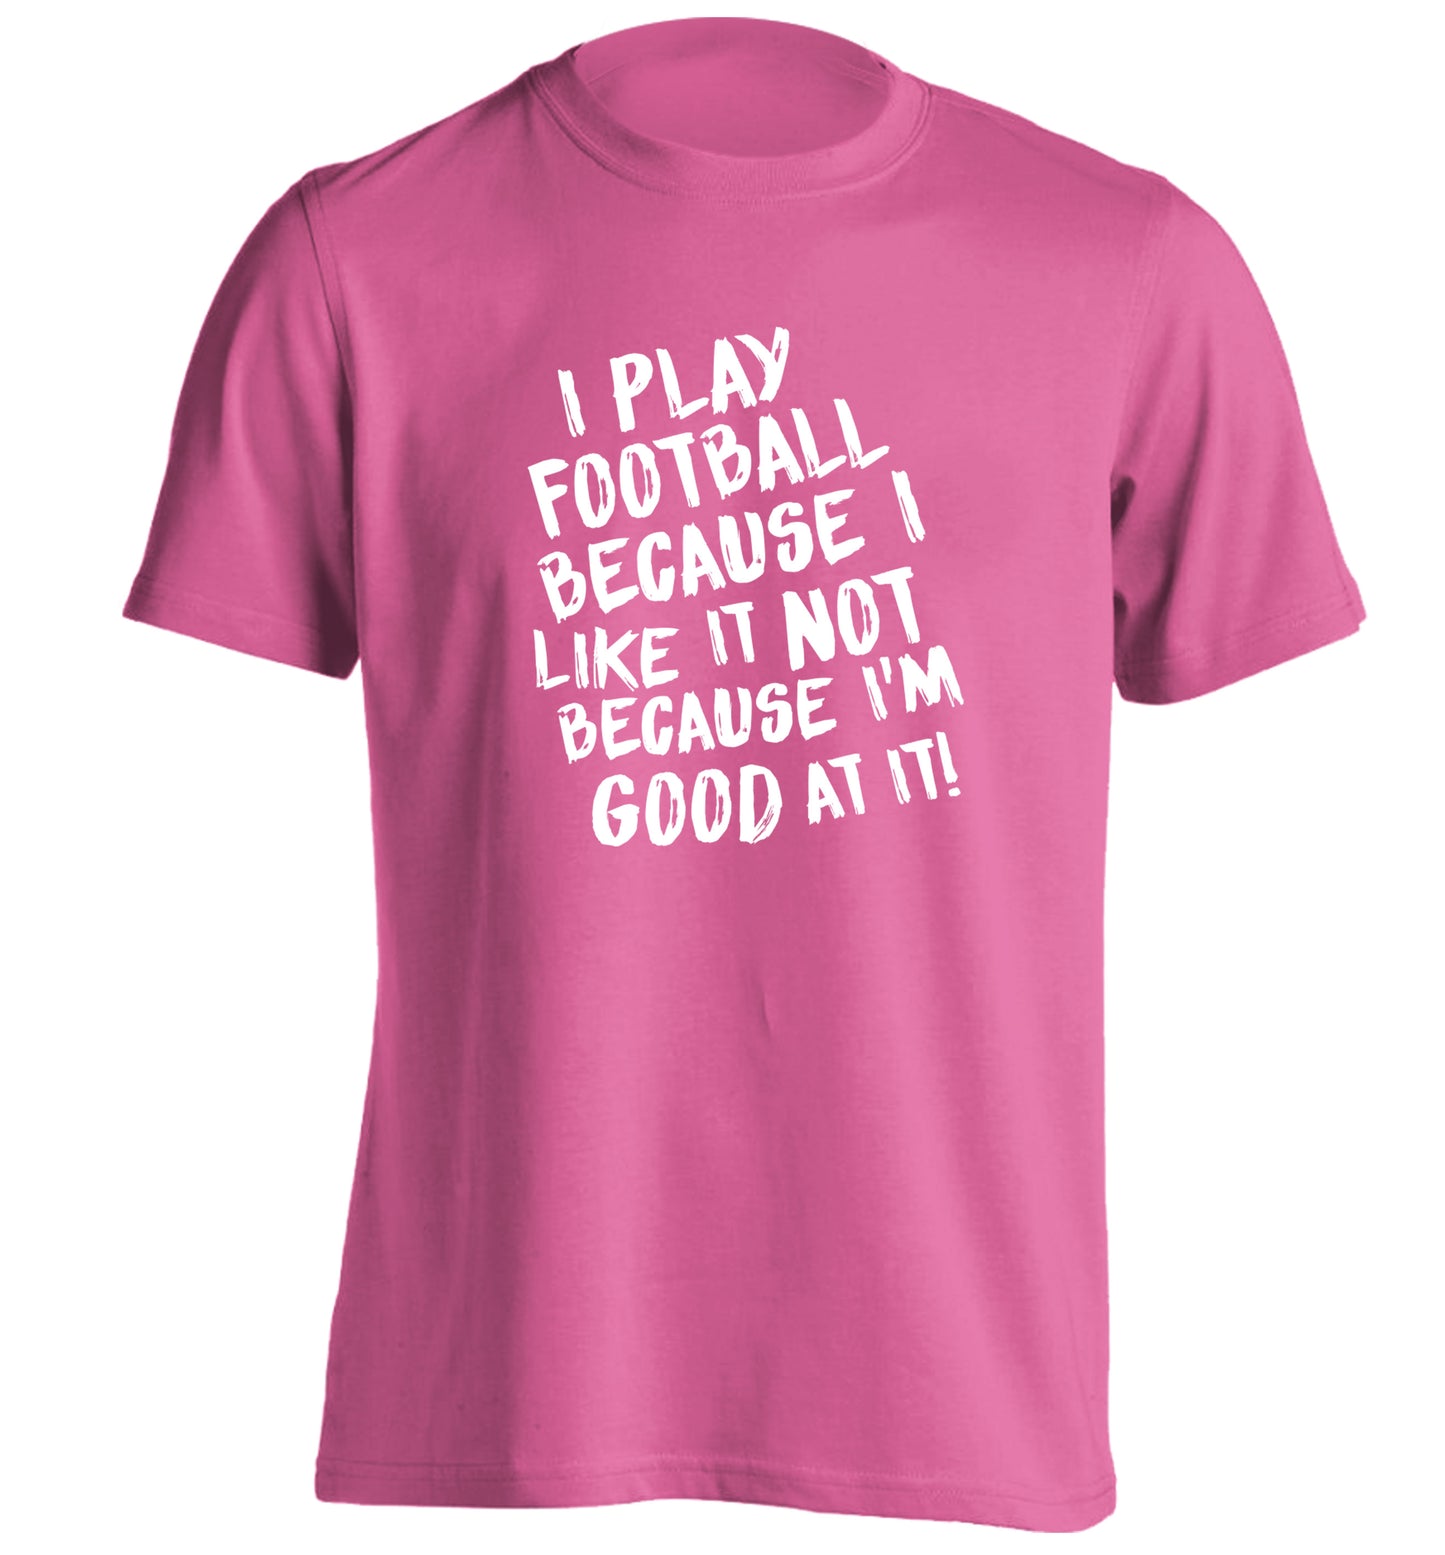 I play football because I like it not because I'm good at it adults unisexpink Tshirt 2XL